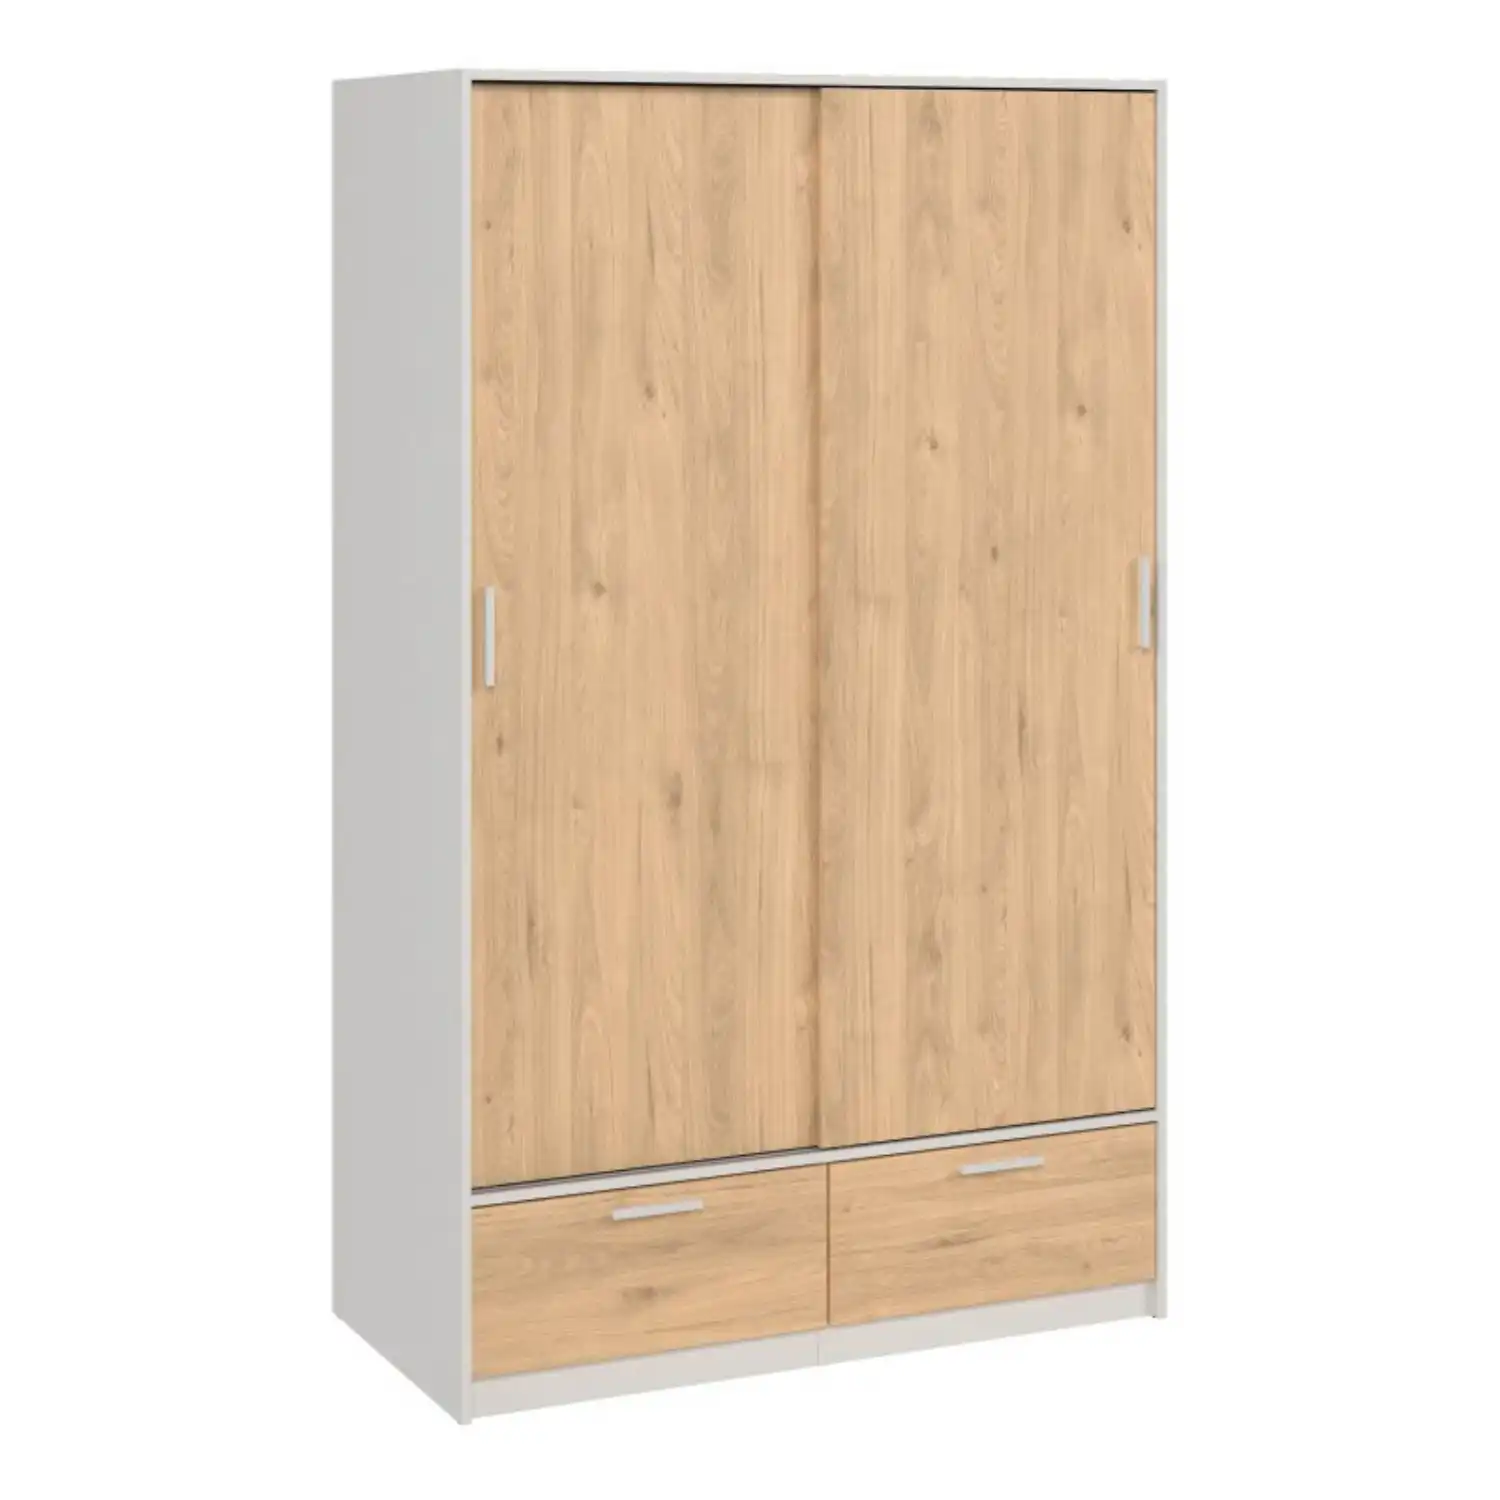 Line Wardrobe with 2 Doors 2 Drawers in White and Jackson Hickory Oak